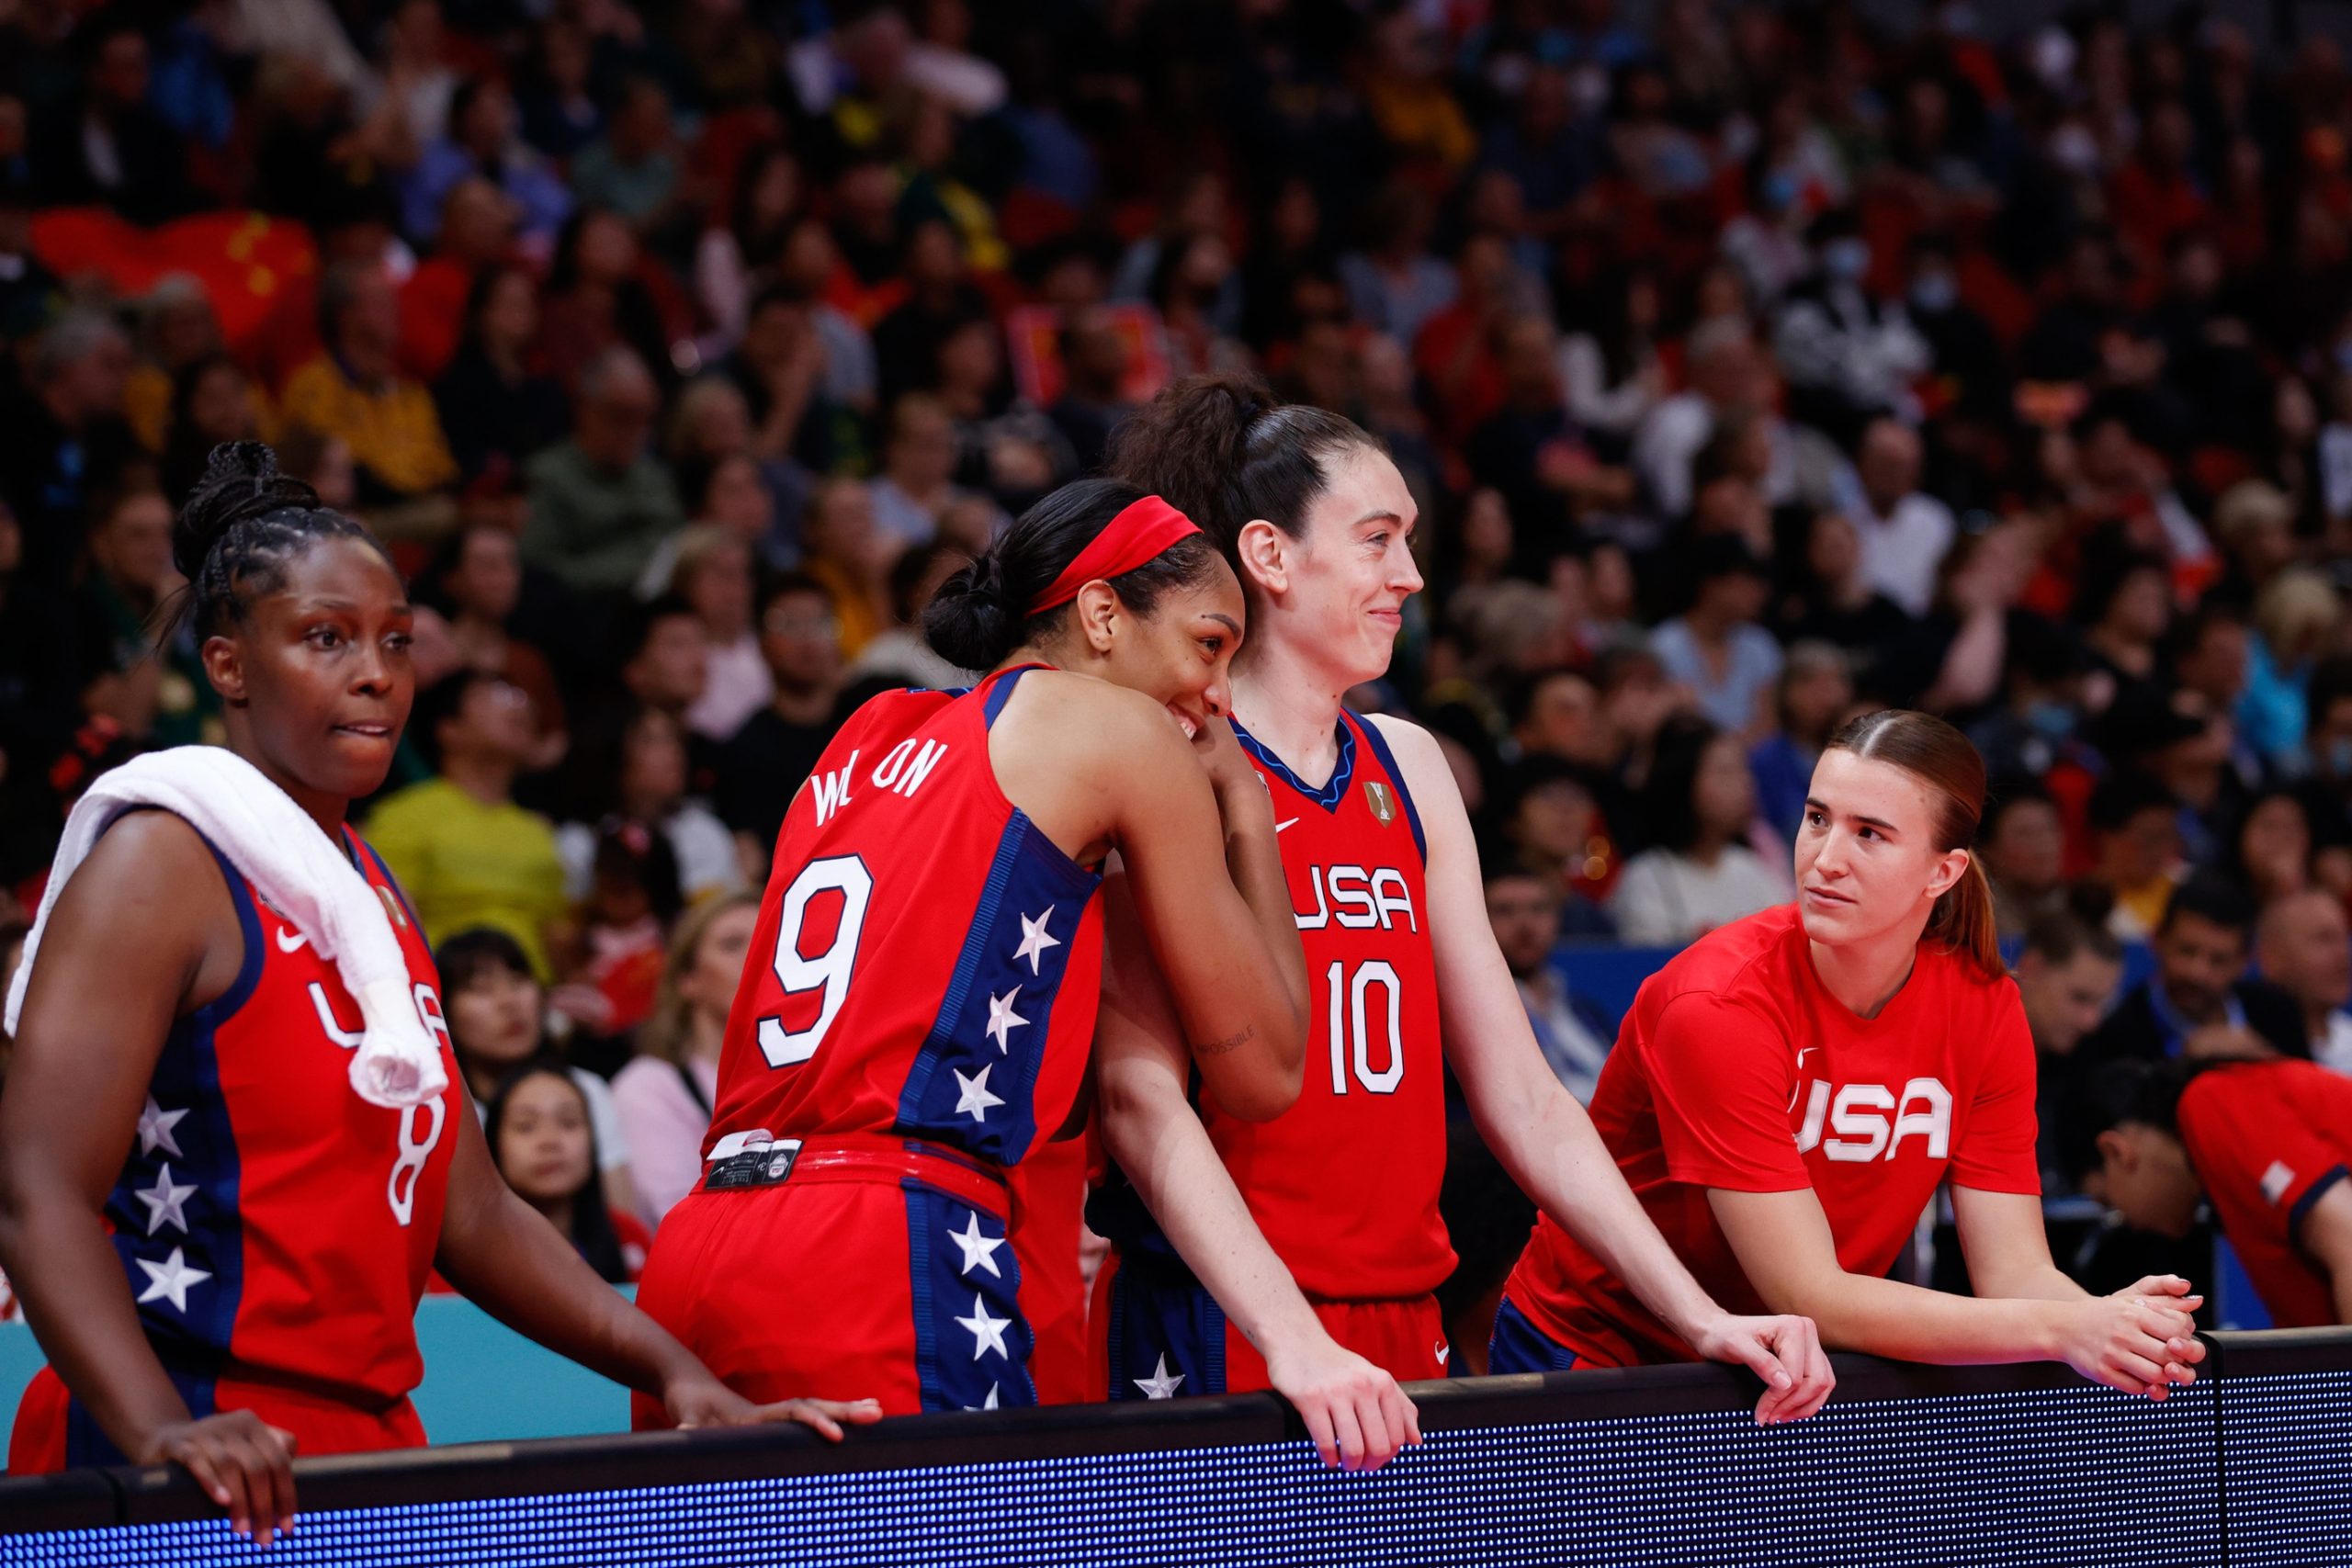 A'ja Wilson and Breanna Stewart each have a team competing in the 2023 WNBA All-Star Game, who will take home the hardware?